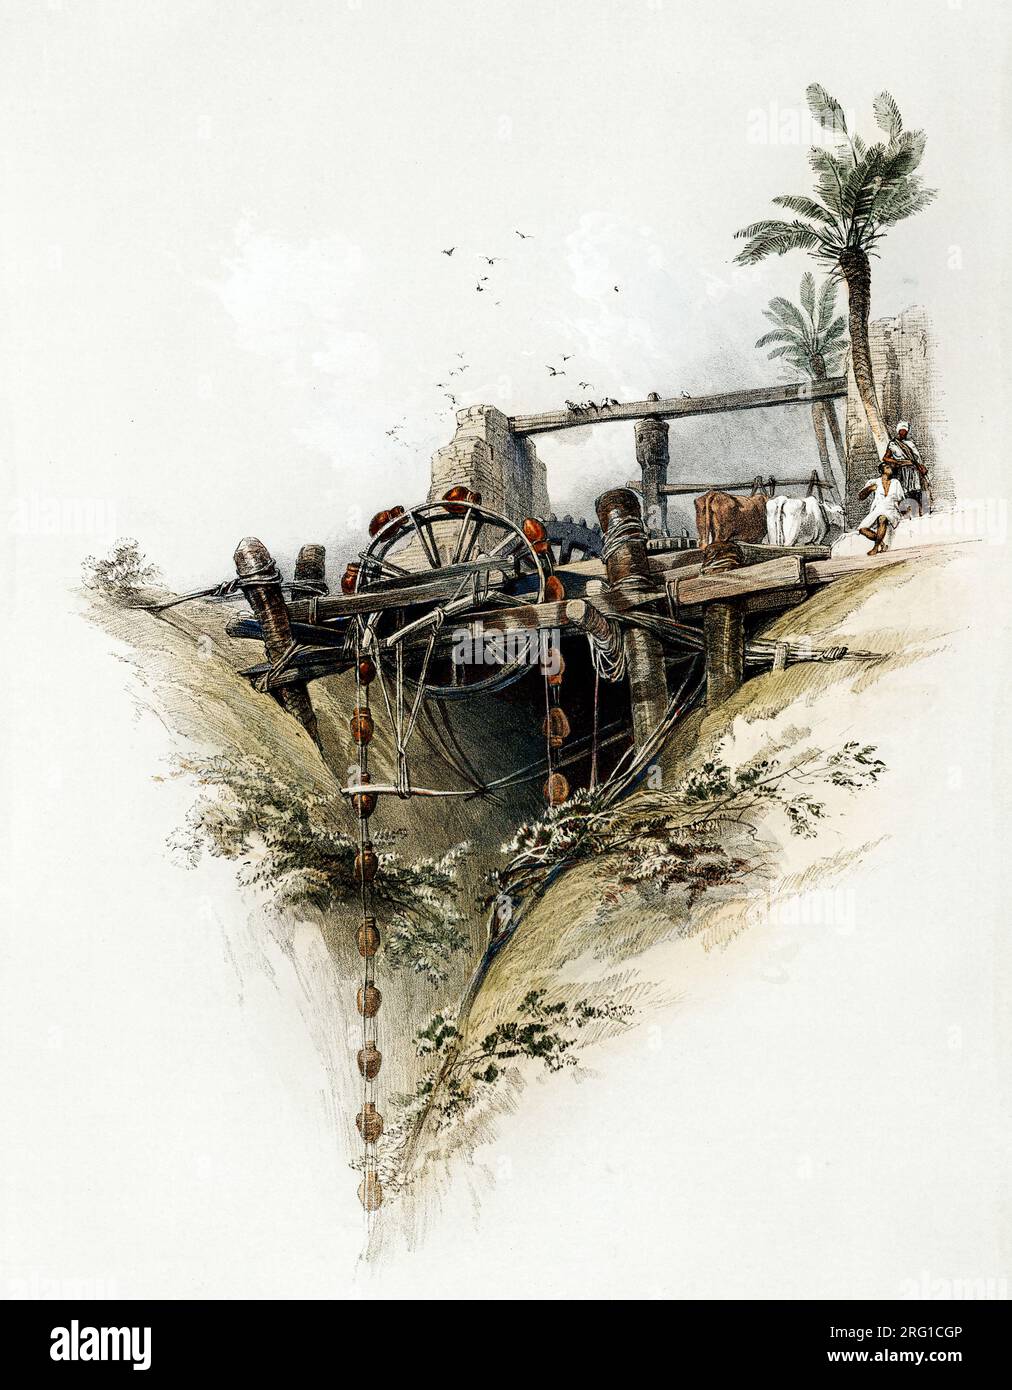 A Persian wheel used in raising water from the Nile illustration by David Roberts. Original from The New York Public Library. Stock Photo